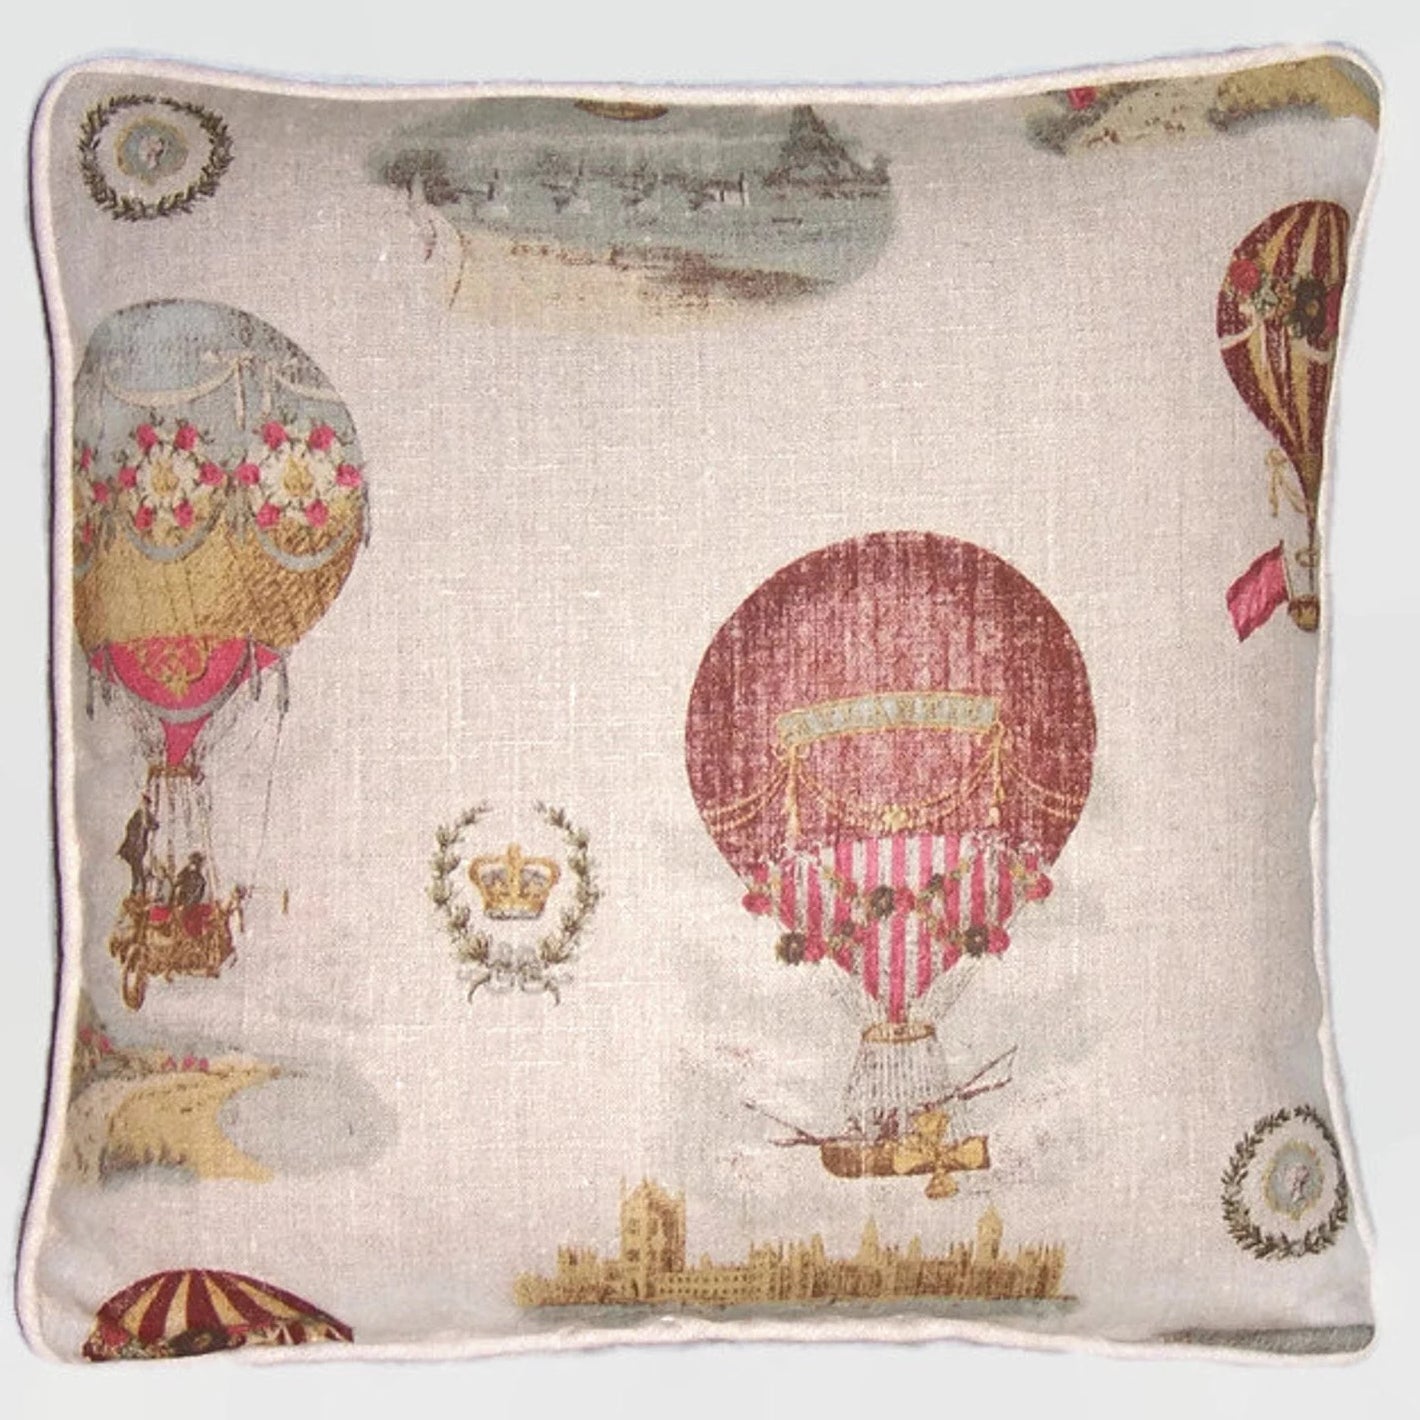 Hot air balloon pillow cover, vintage look print on linen